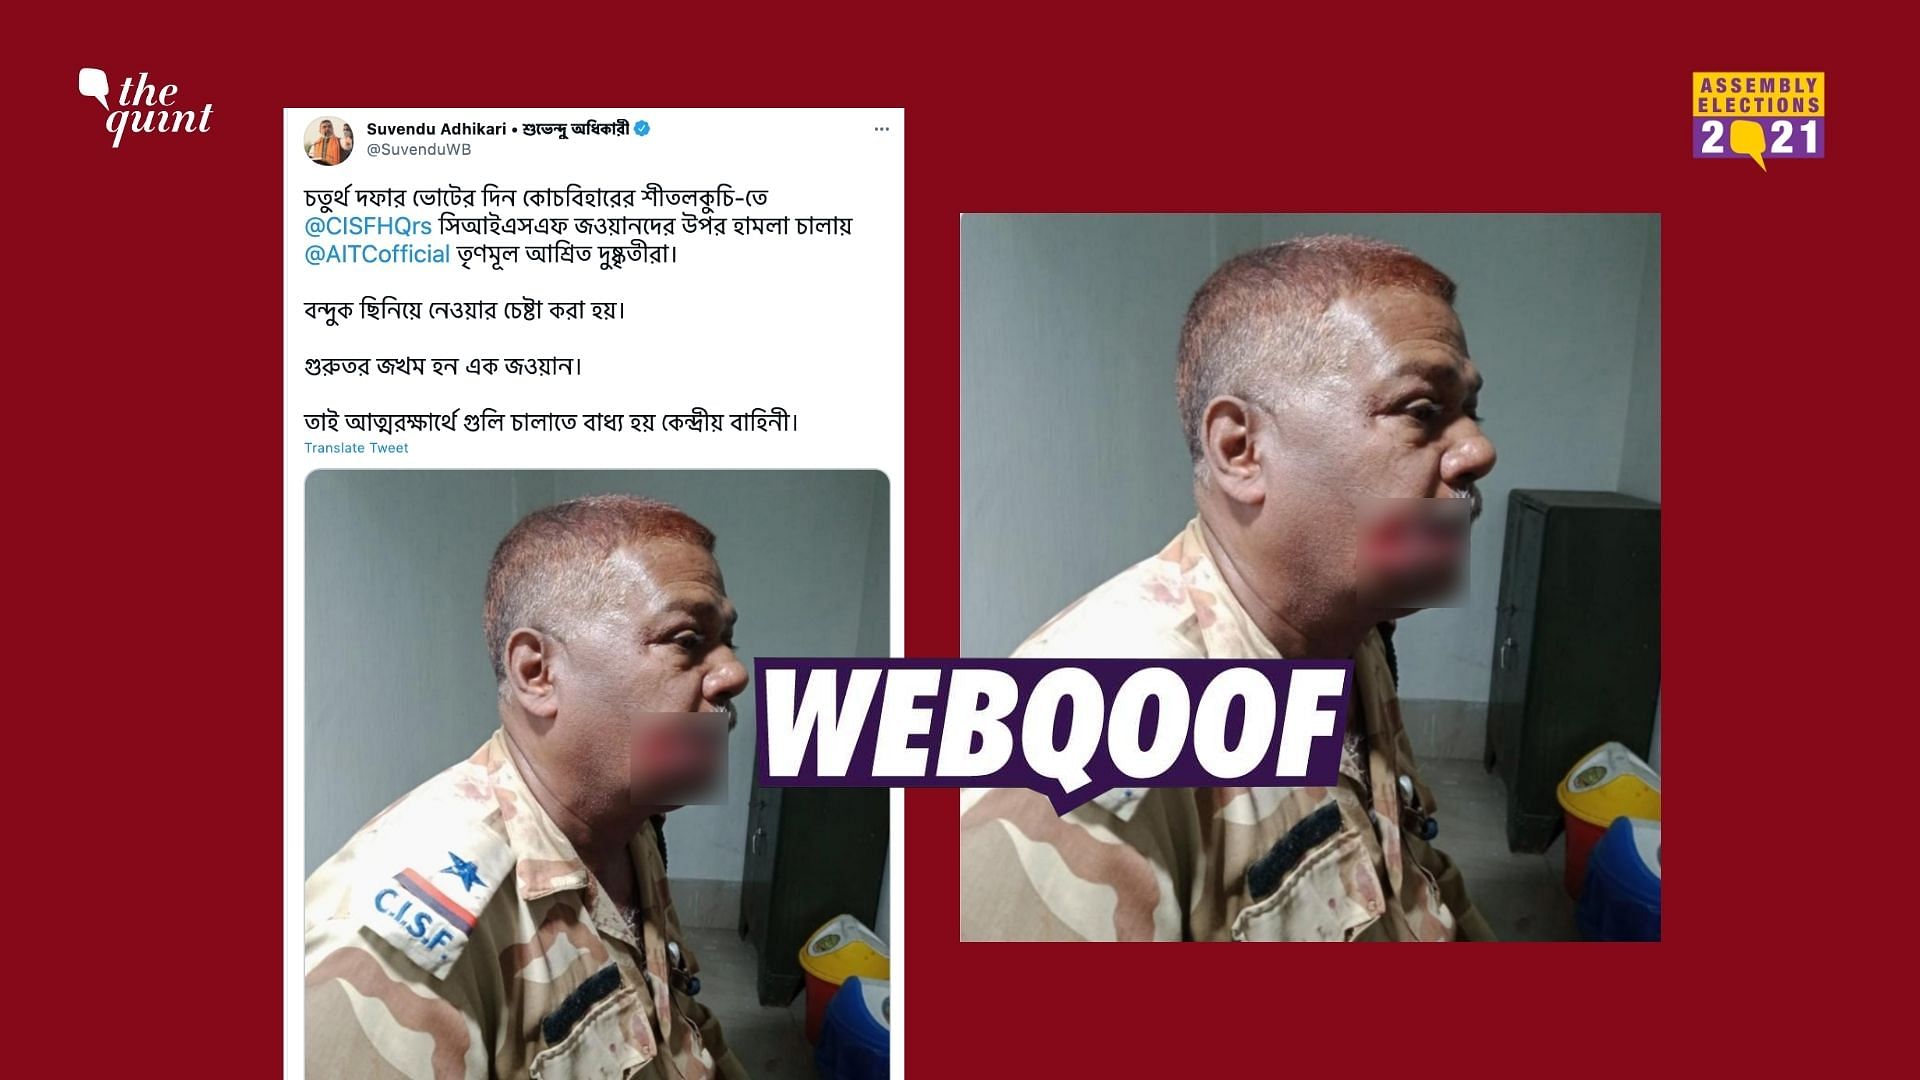 The viral image is from Jharkhand when ASI SP Sharma who was on duty at a CISF camp was attacked by langurs.